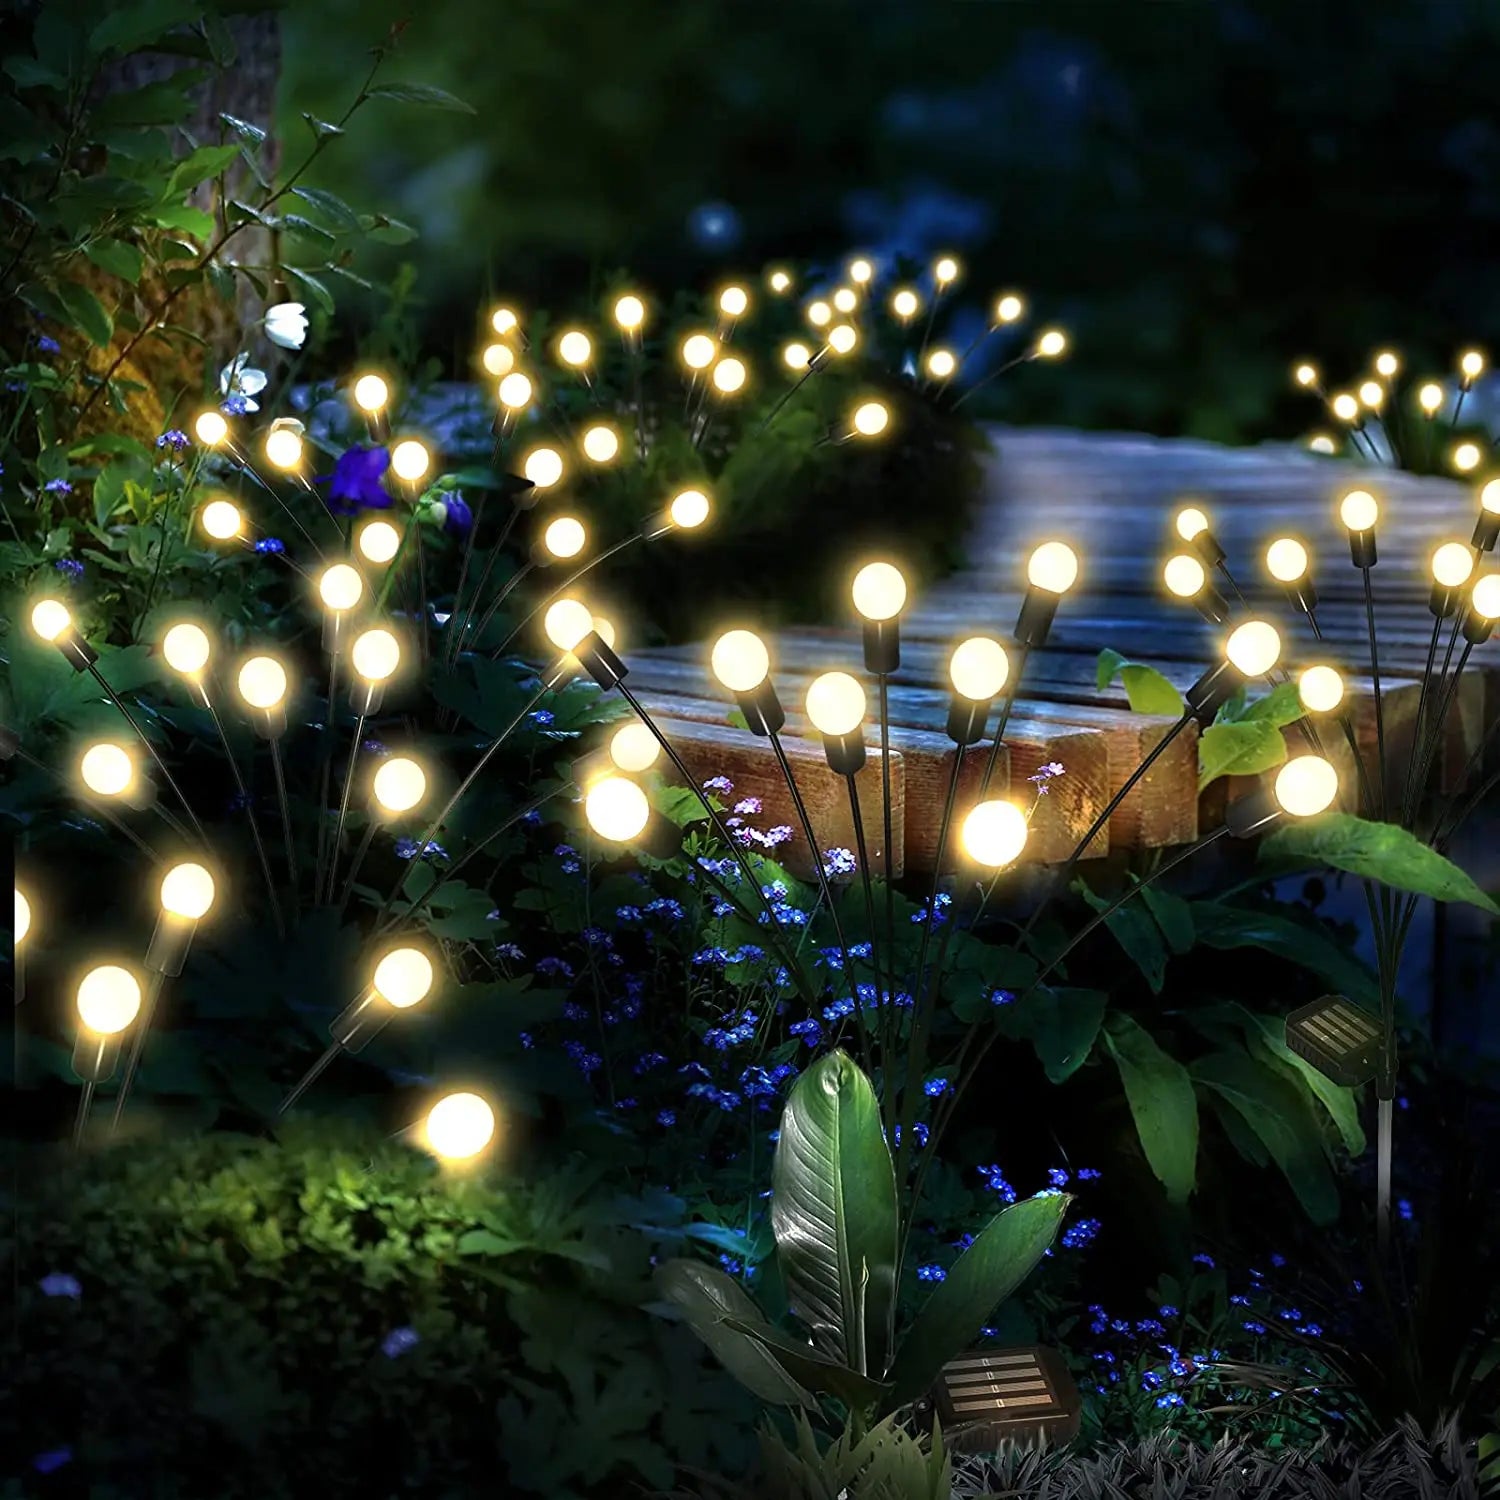 10/8/6LED Solar Firefly Light, Solar-powered firefly light that charges independently, ready to use in 4-6 hours of sunlight.